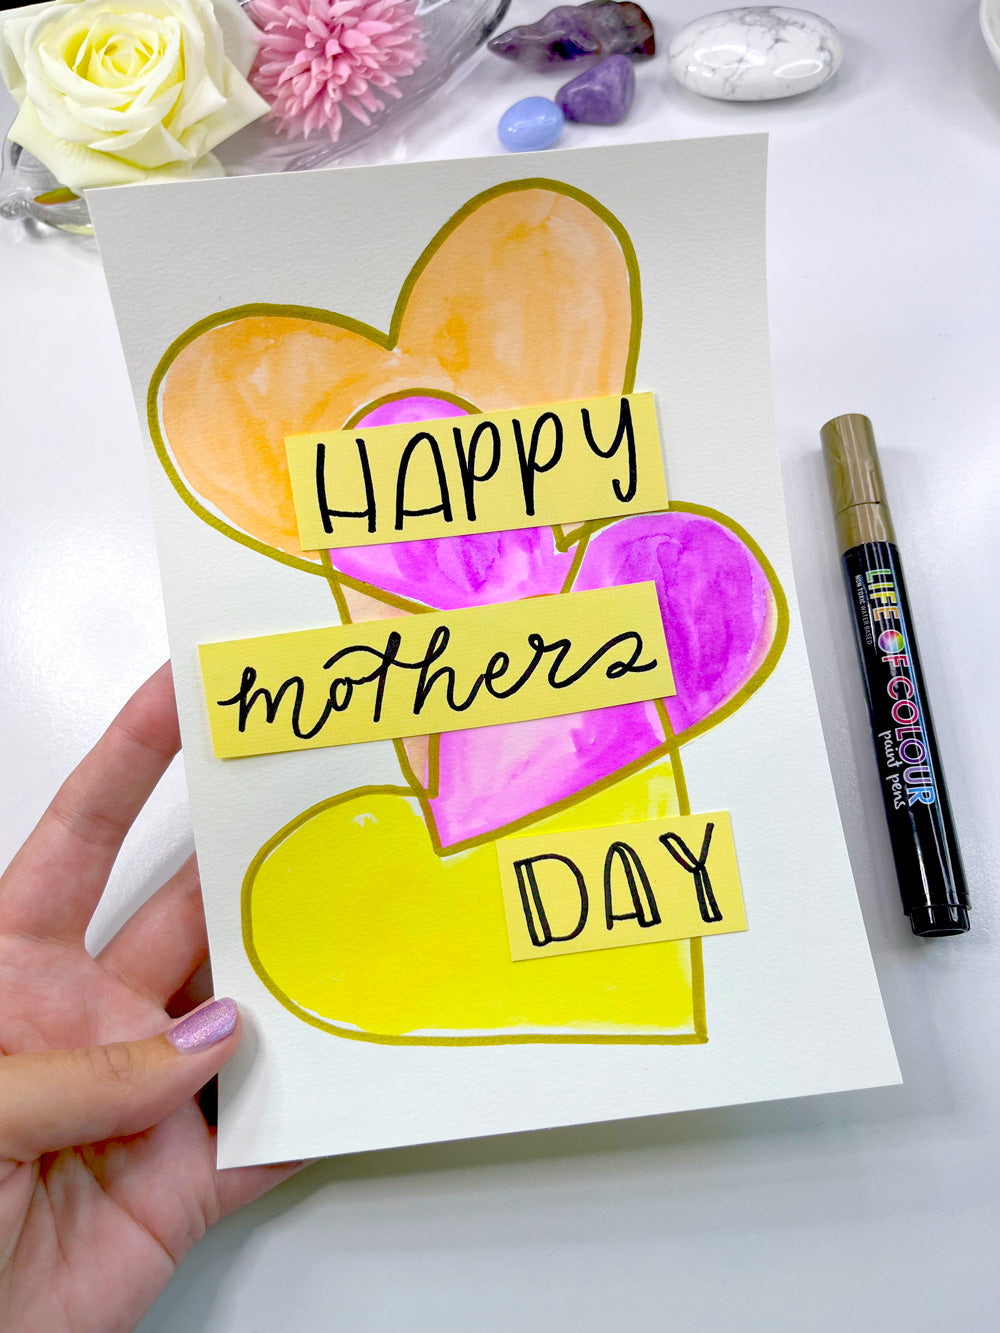 https://cdn.shopify.com/s/files/1/2374/1375/files/mothers-day-stained-glass.jpg?v=1650554156